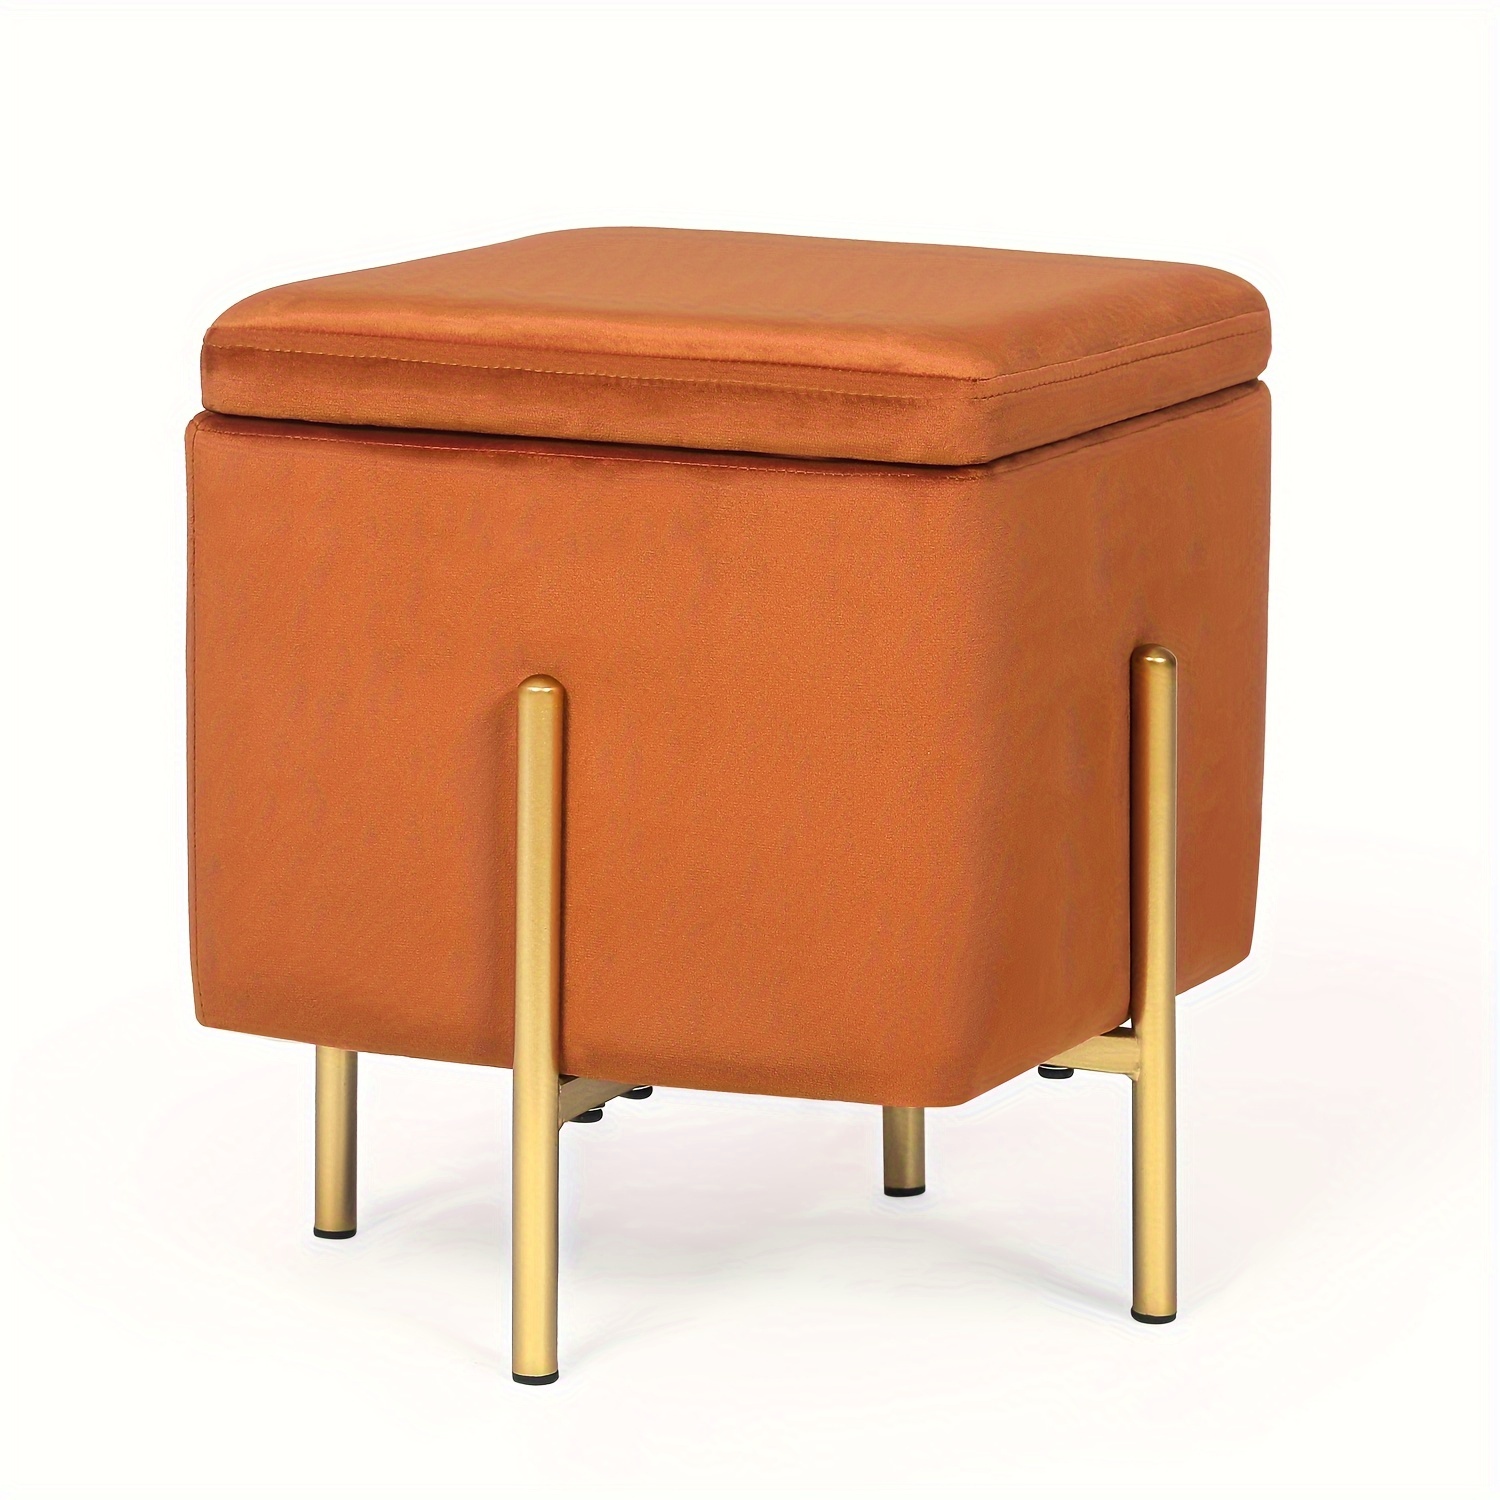 

Small Square Velvet Storage Ottoman Multi-function Vanity Stool Footrest Accent High Support Metal Legs Orange